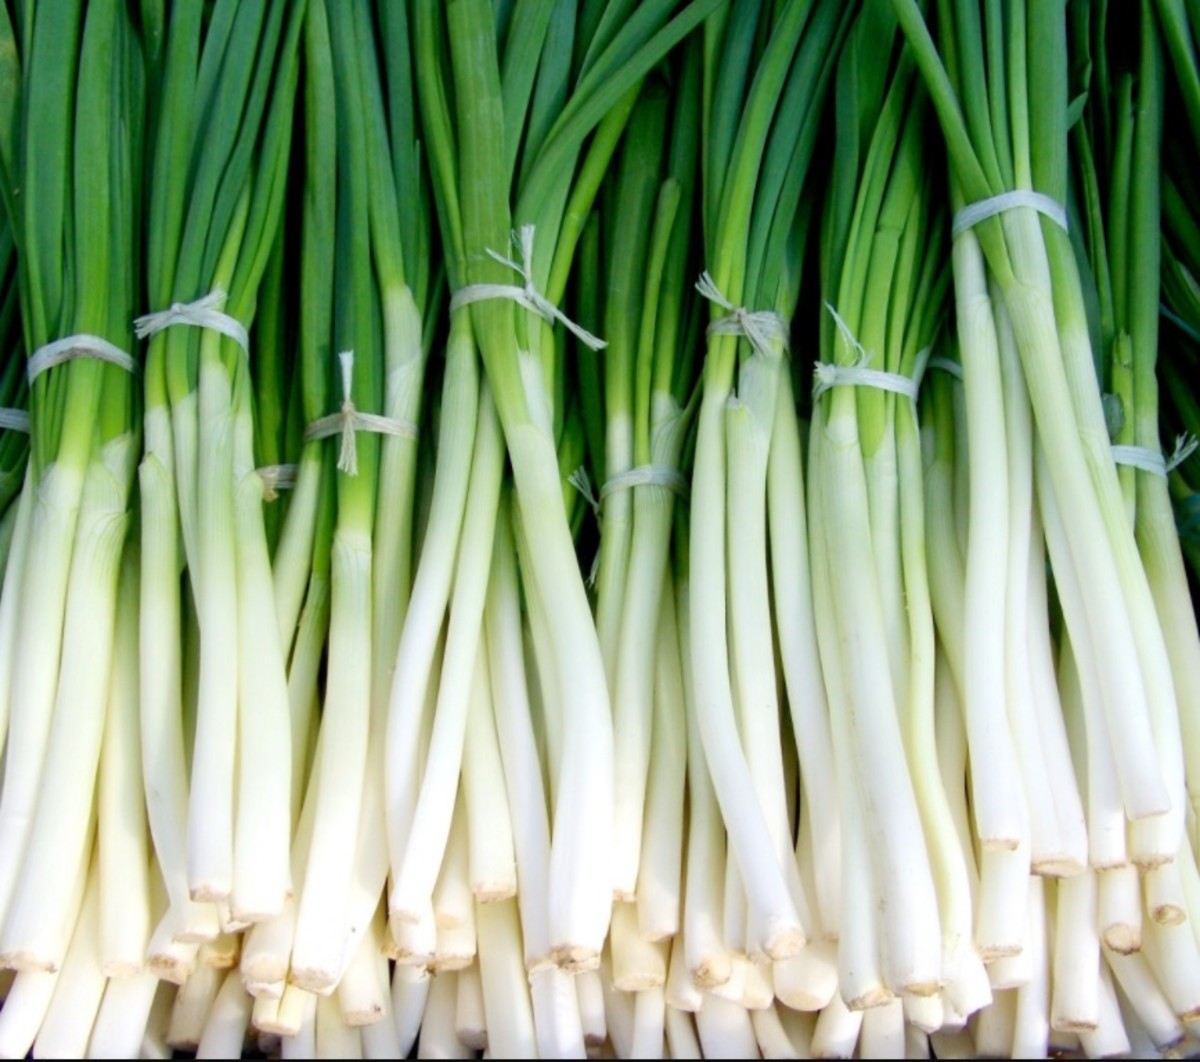 Scallions do not have a prominent bulb.